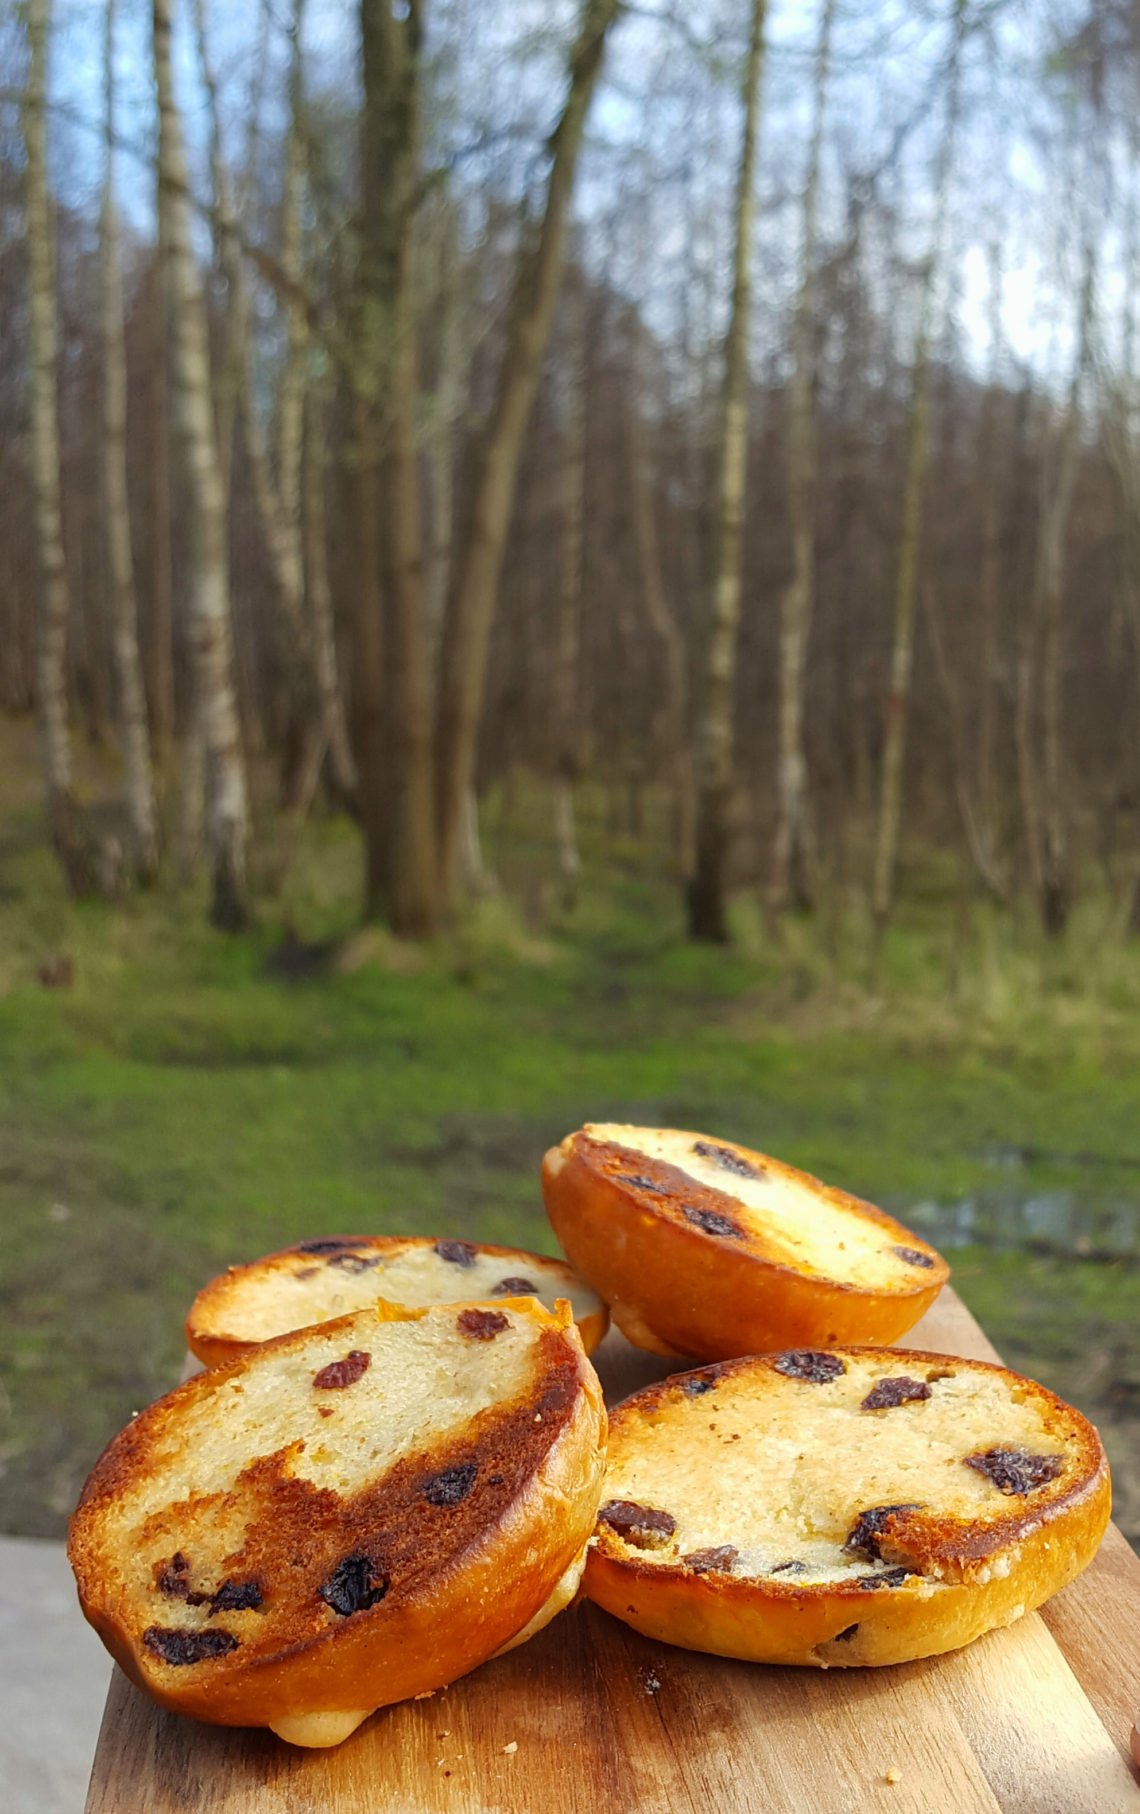 a recipe for hot cross buns that you can enjoy in the woods